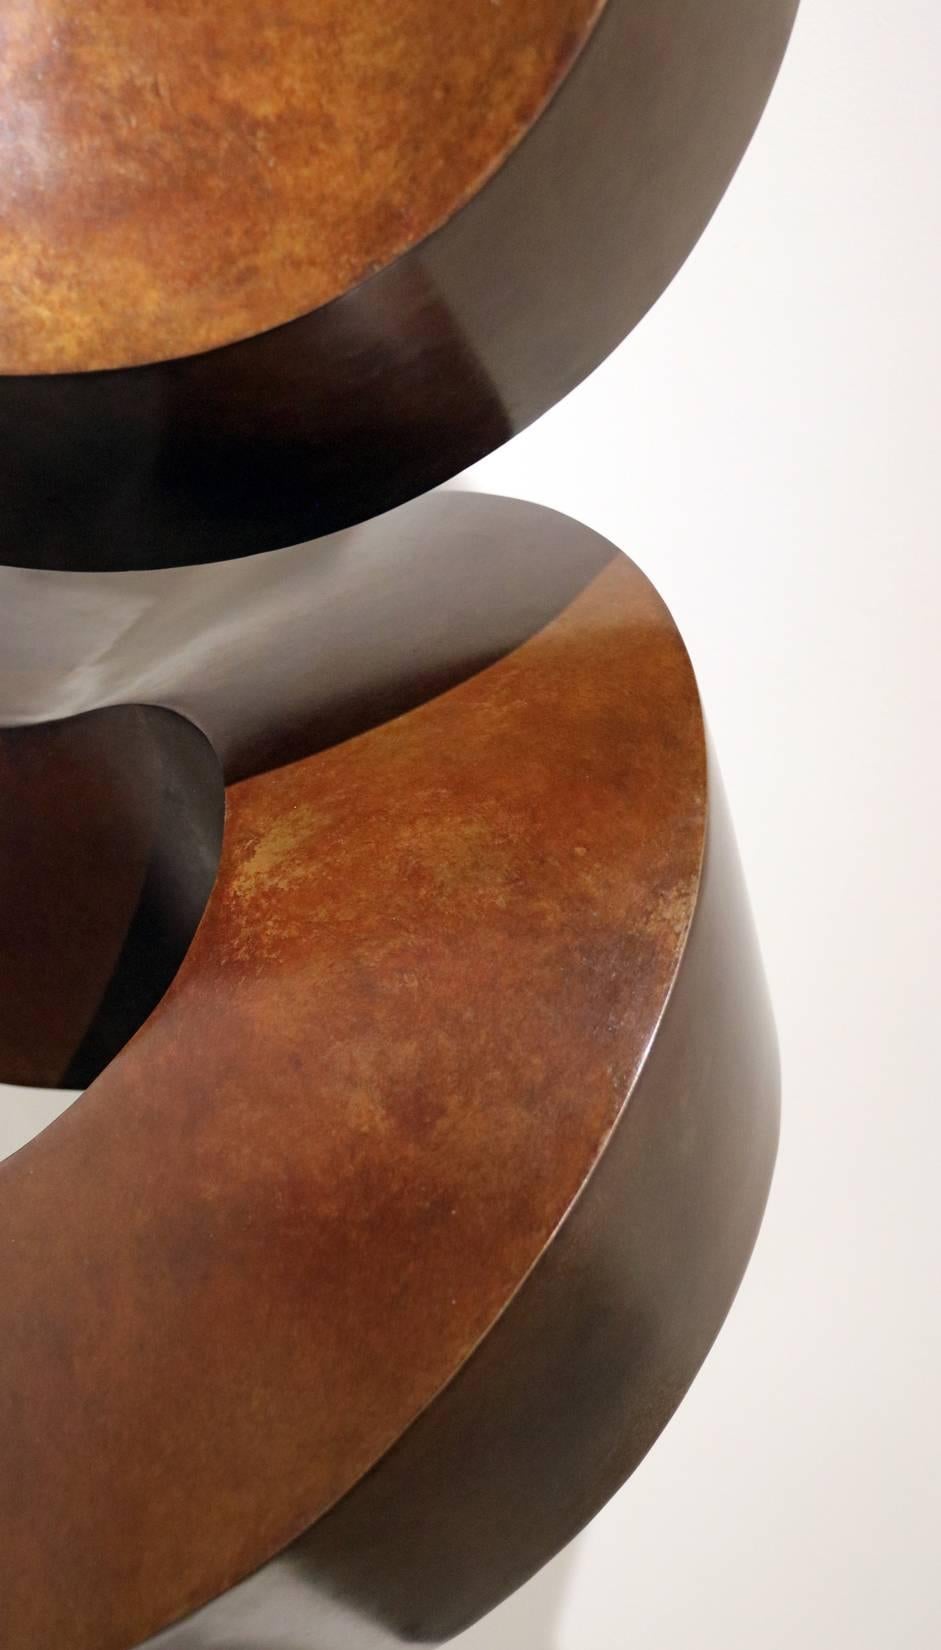 Up - Gold Abstract Sculpture by Clement Meadmore